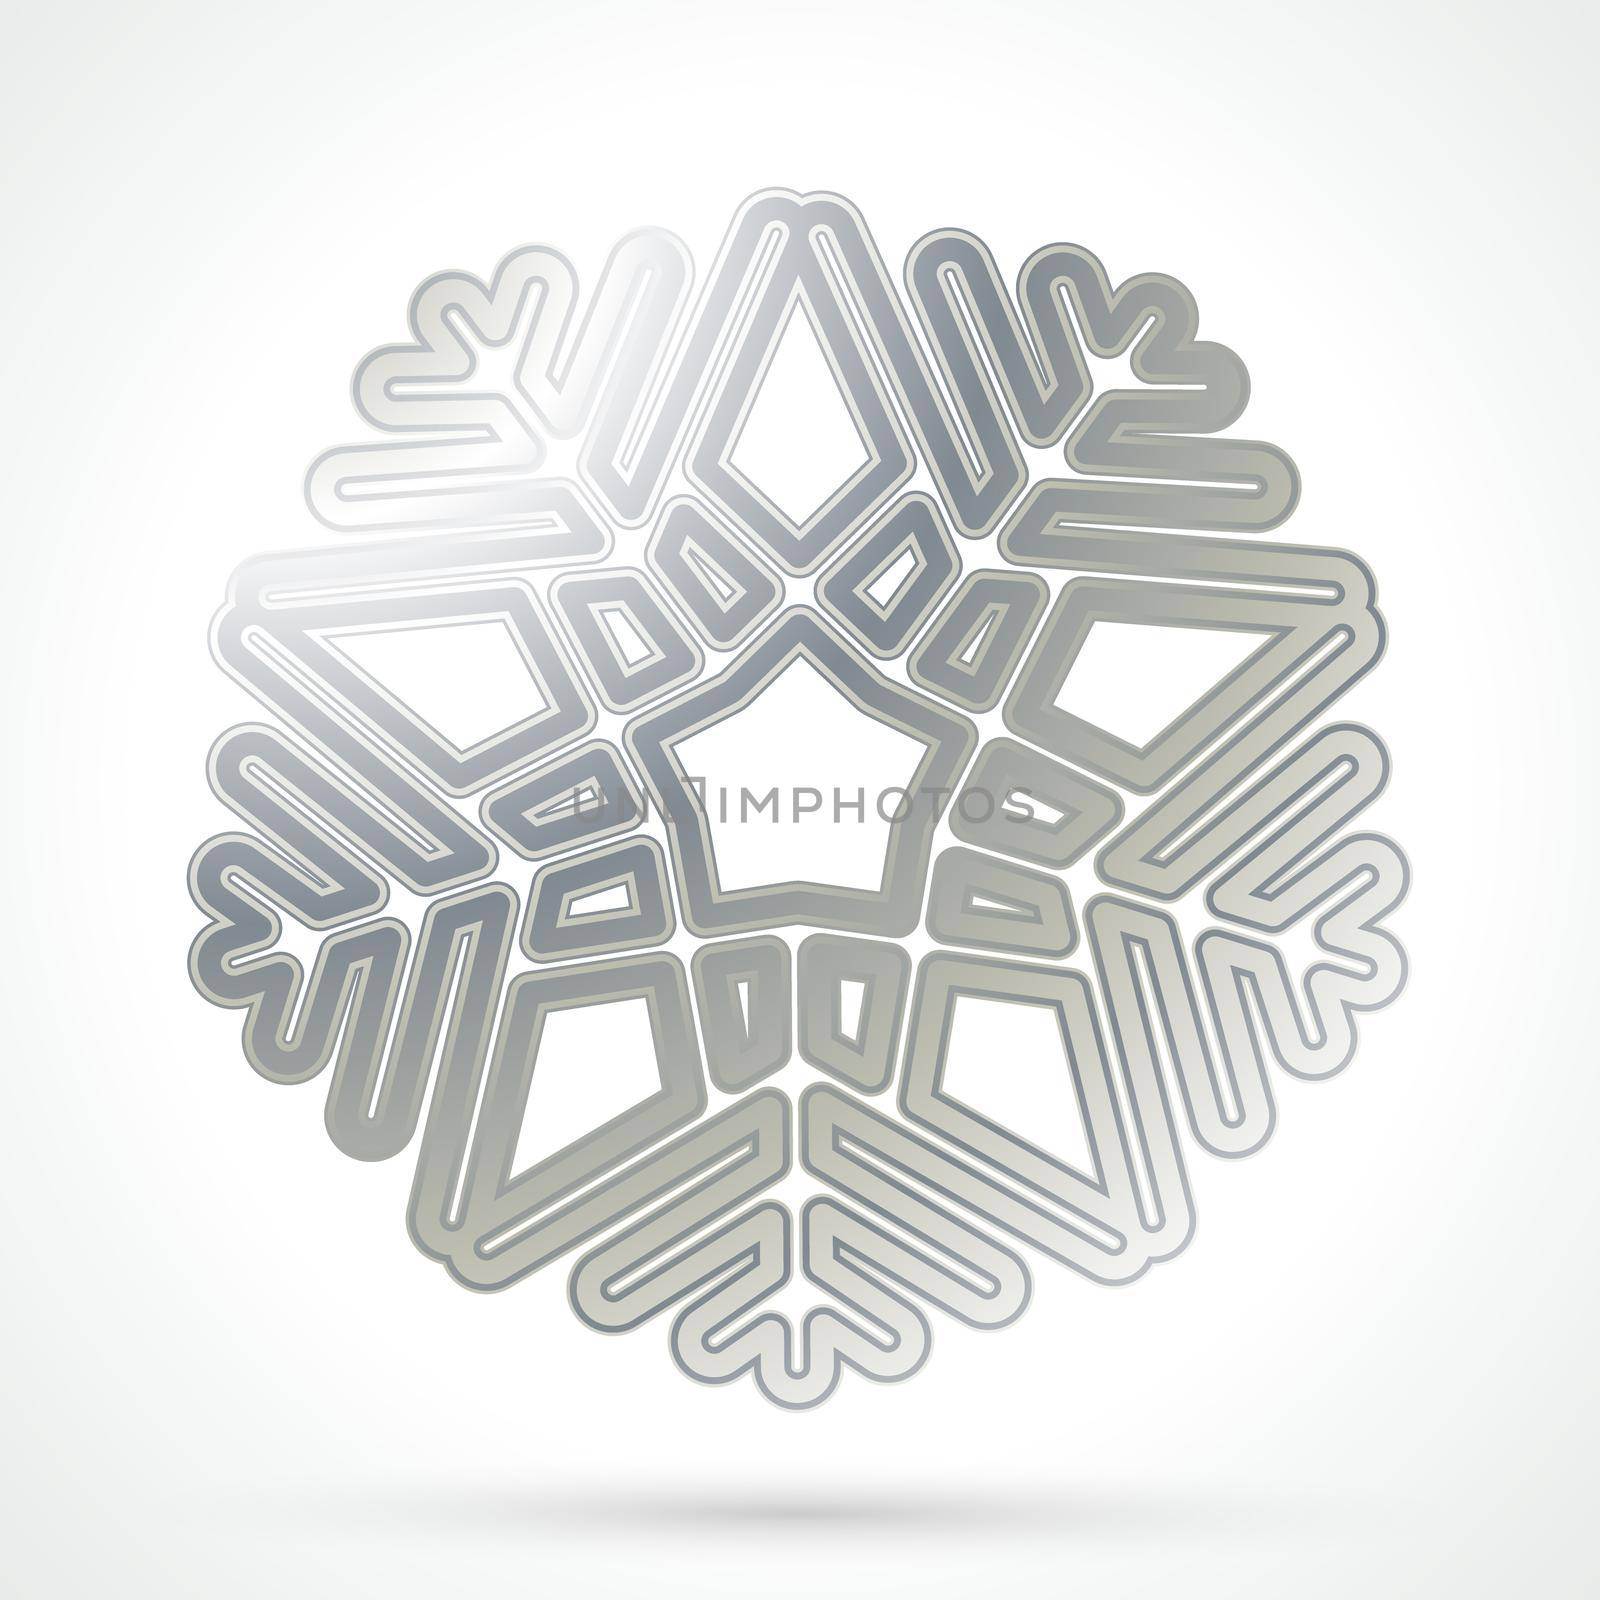 Silver snowflake icon. Abstract winter symbol. Decorative element for brochure, flyer, greeting card. Vector illustration.